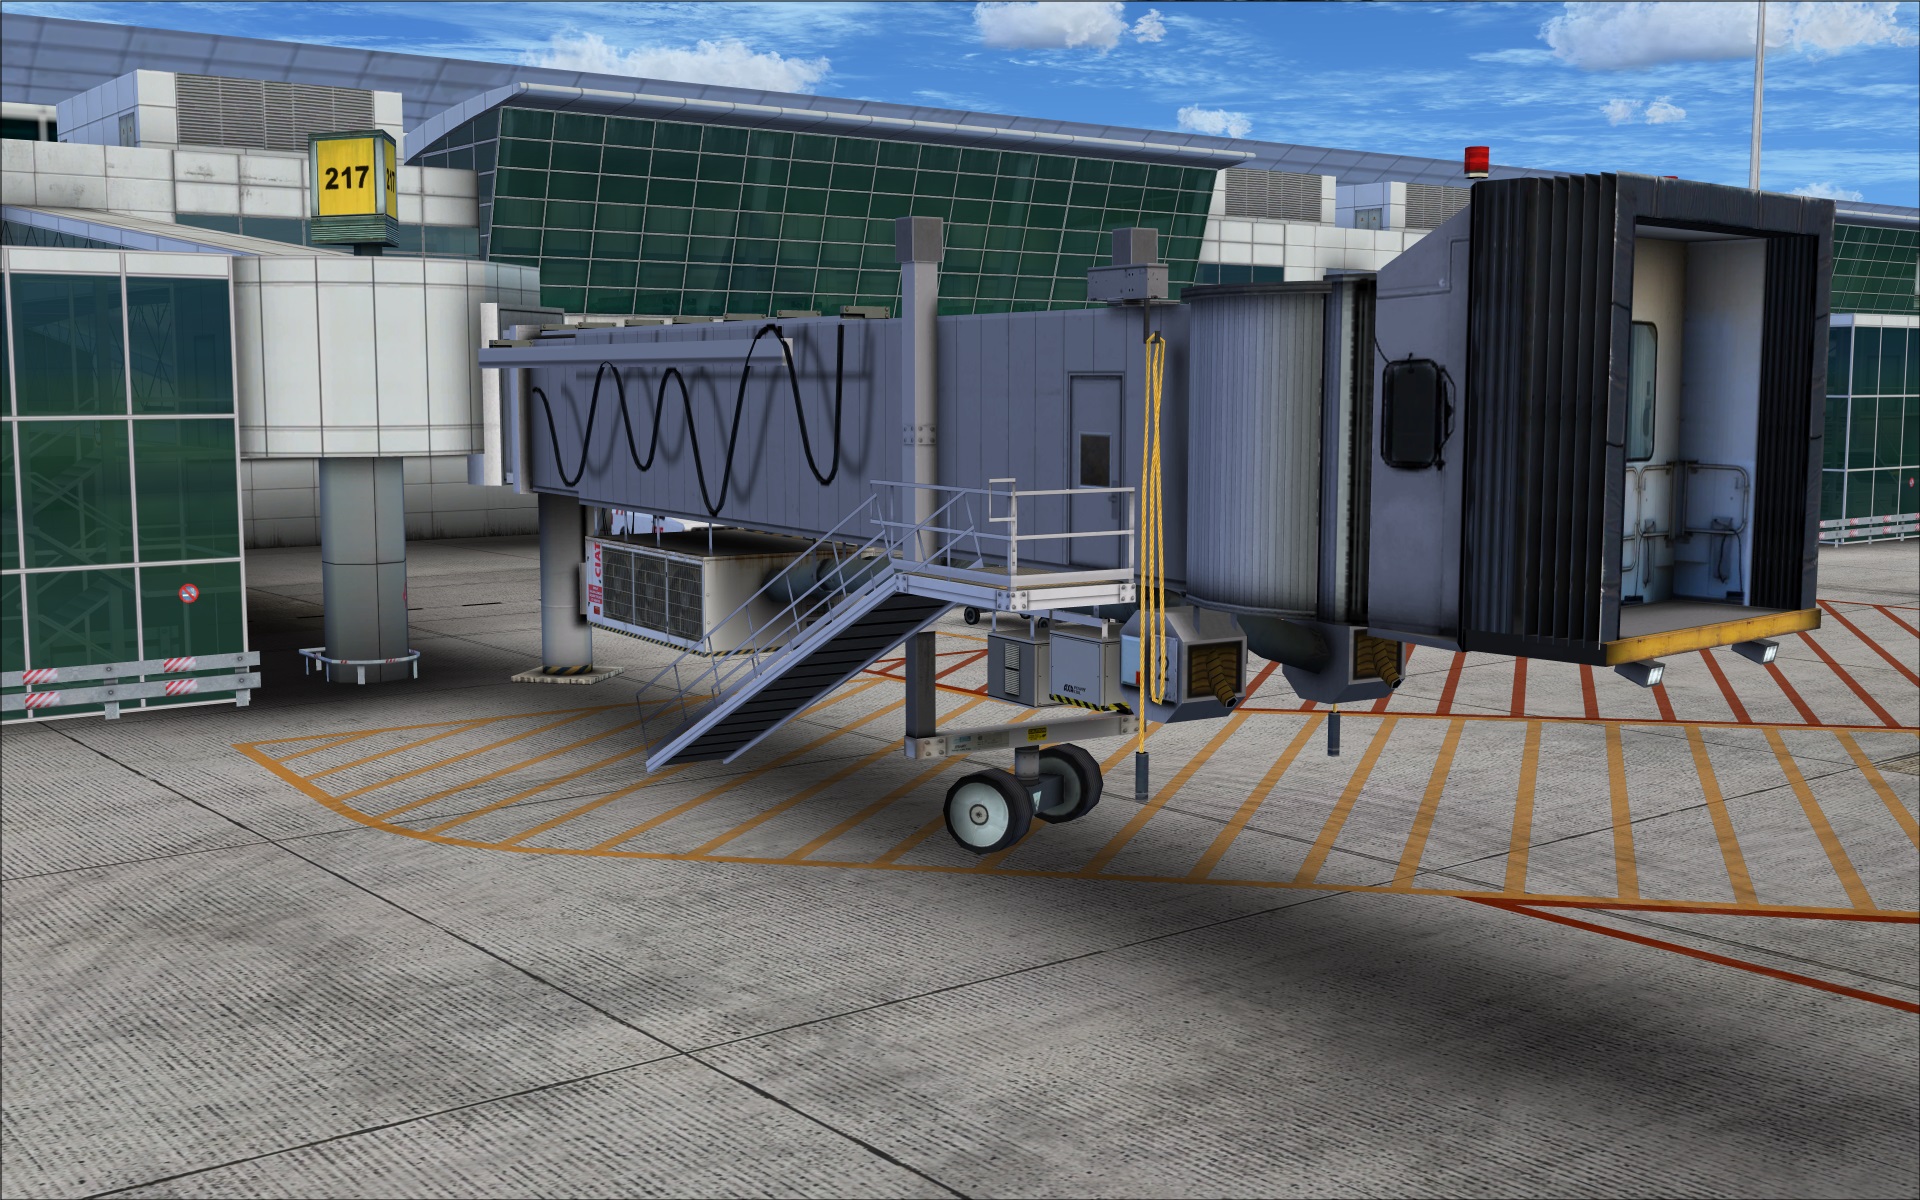 fsx taxi2gate ltba istanbul 100% working complete